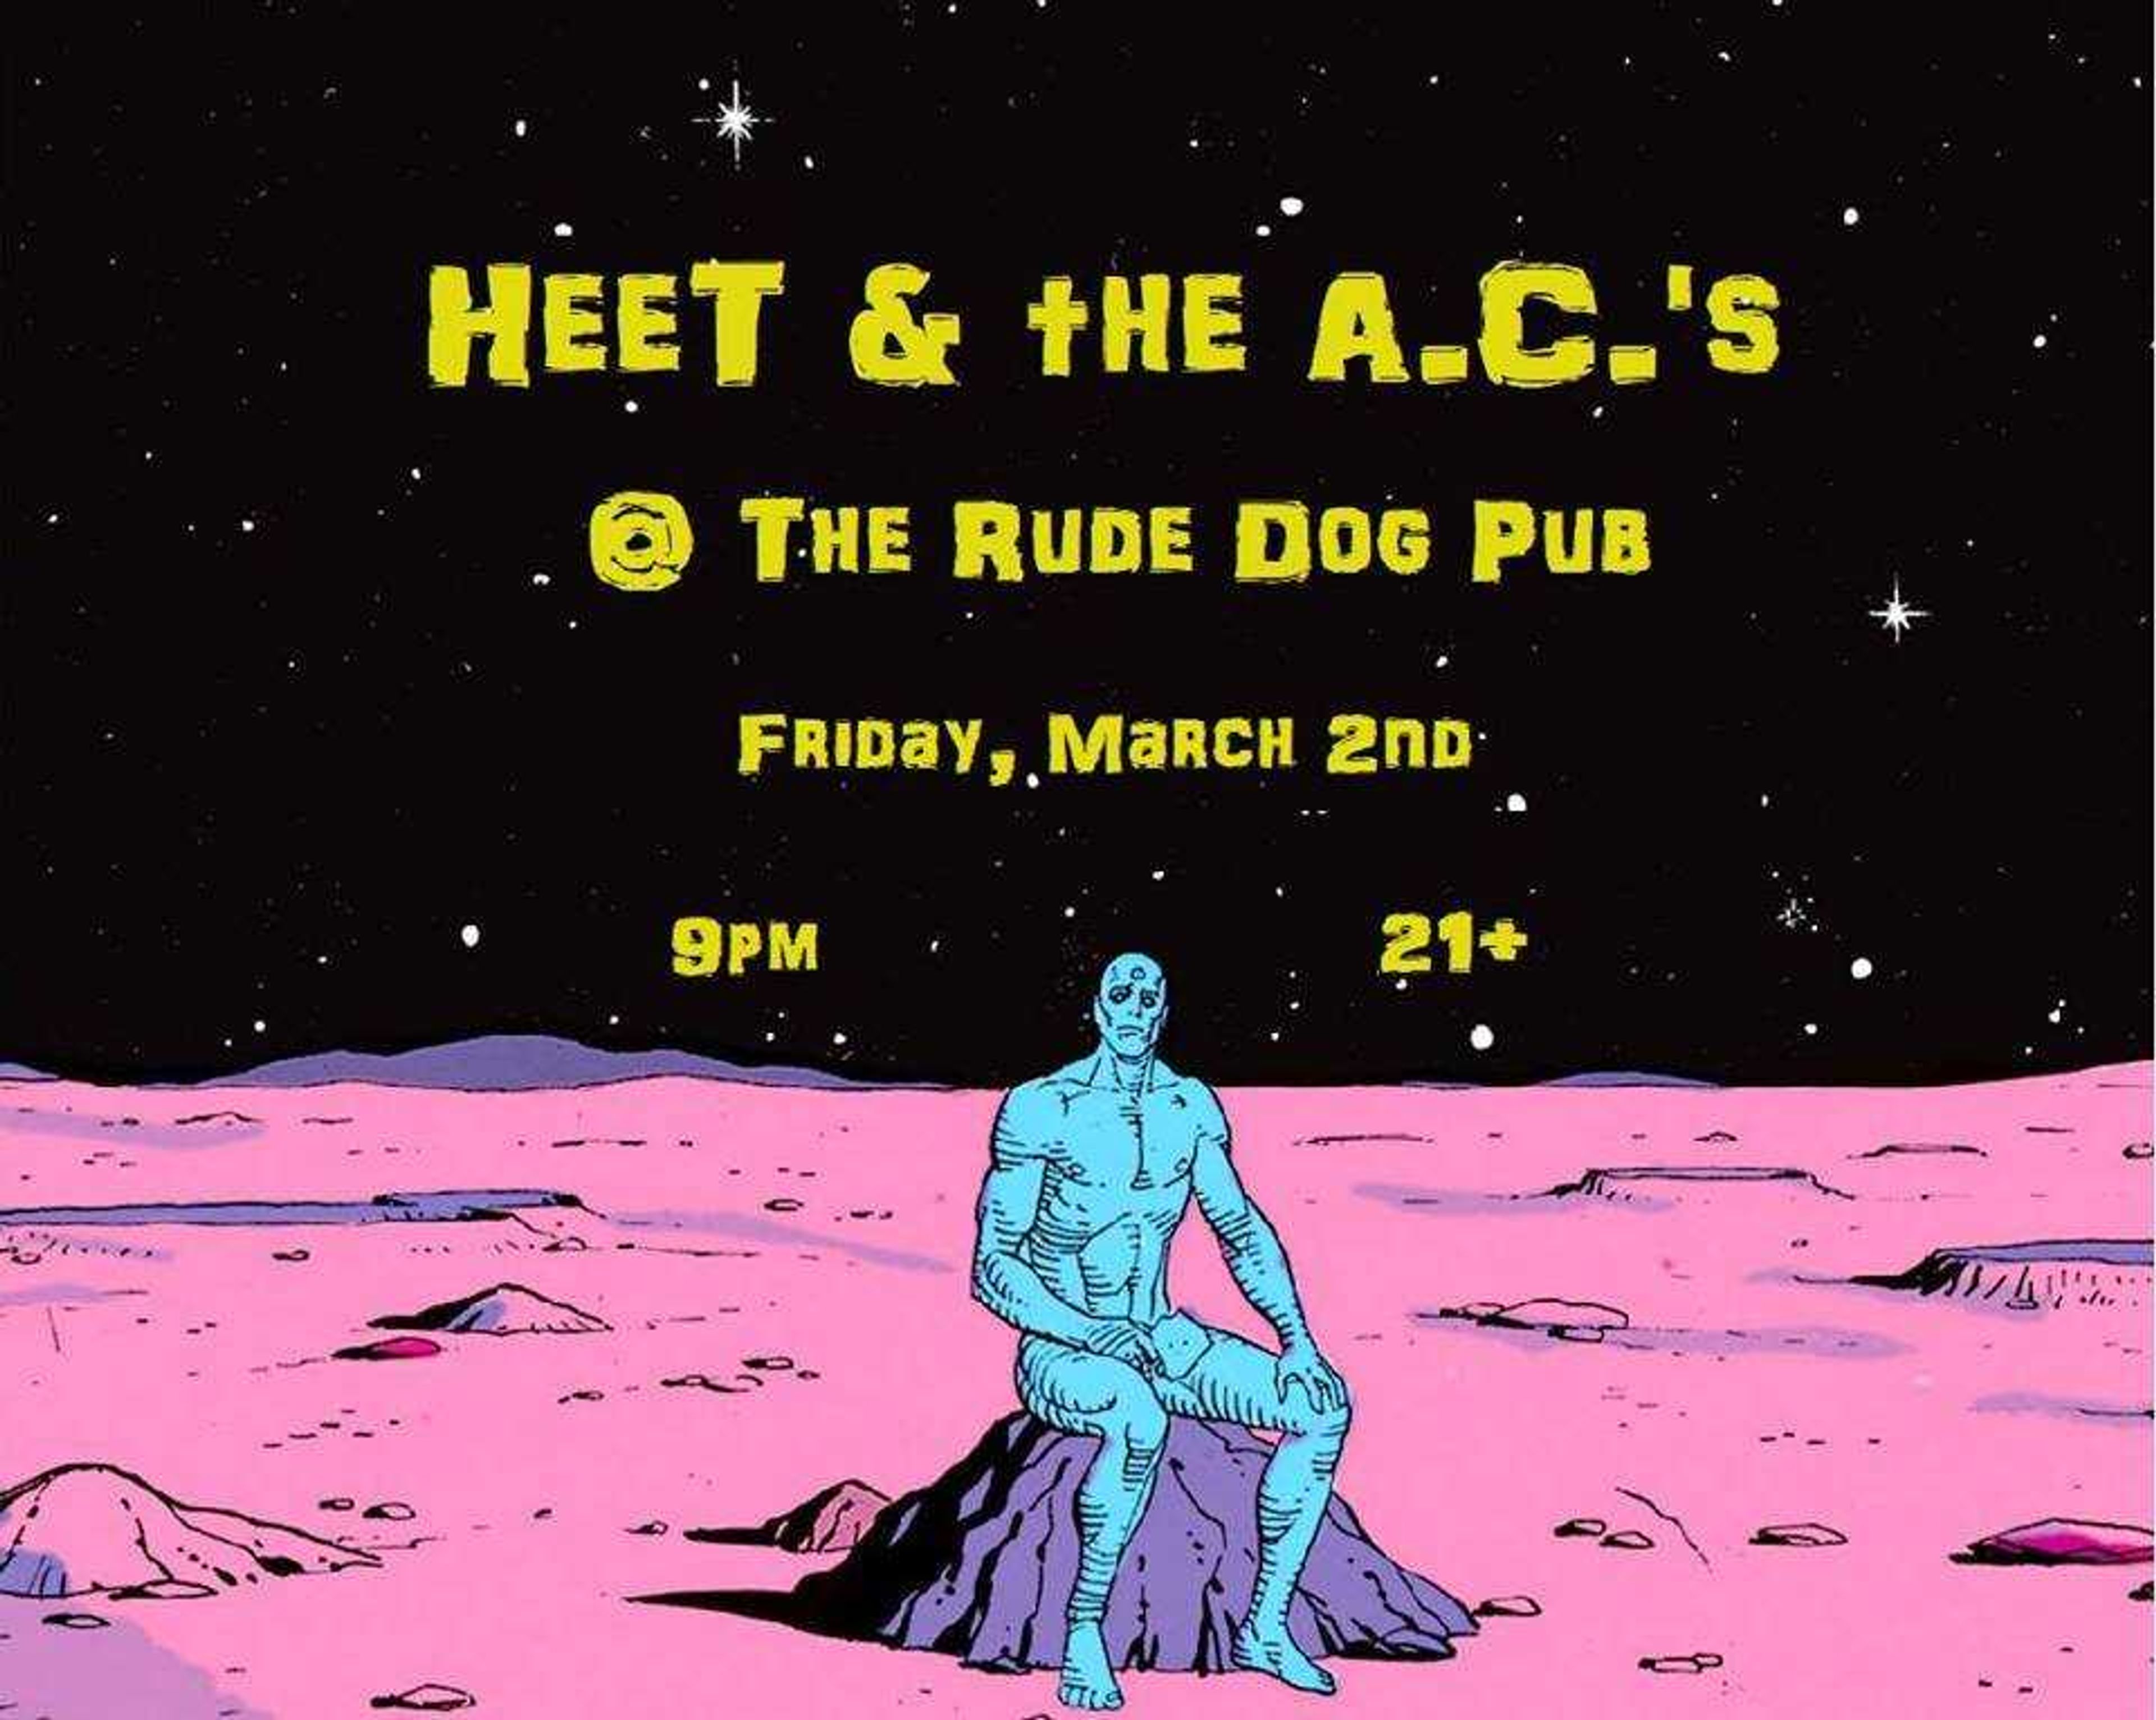 The poster for Heet and the A.C.'s at the Rude Dog Pub Friday, March 2.